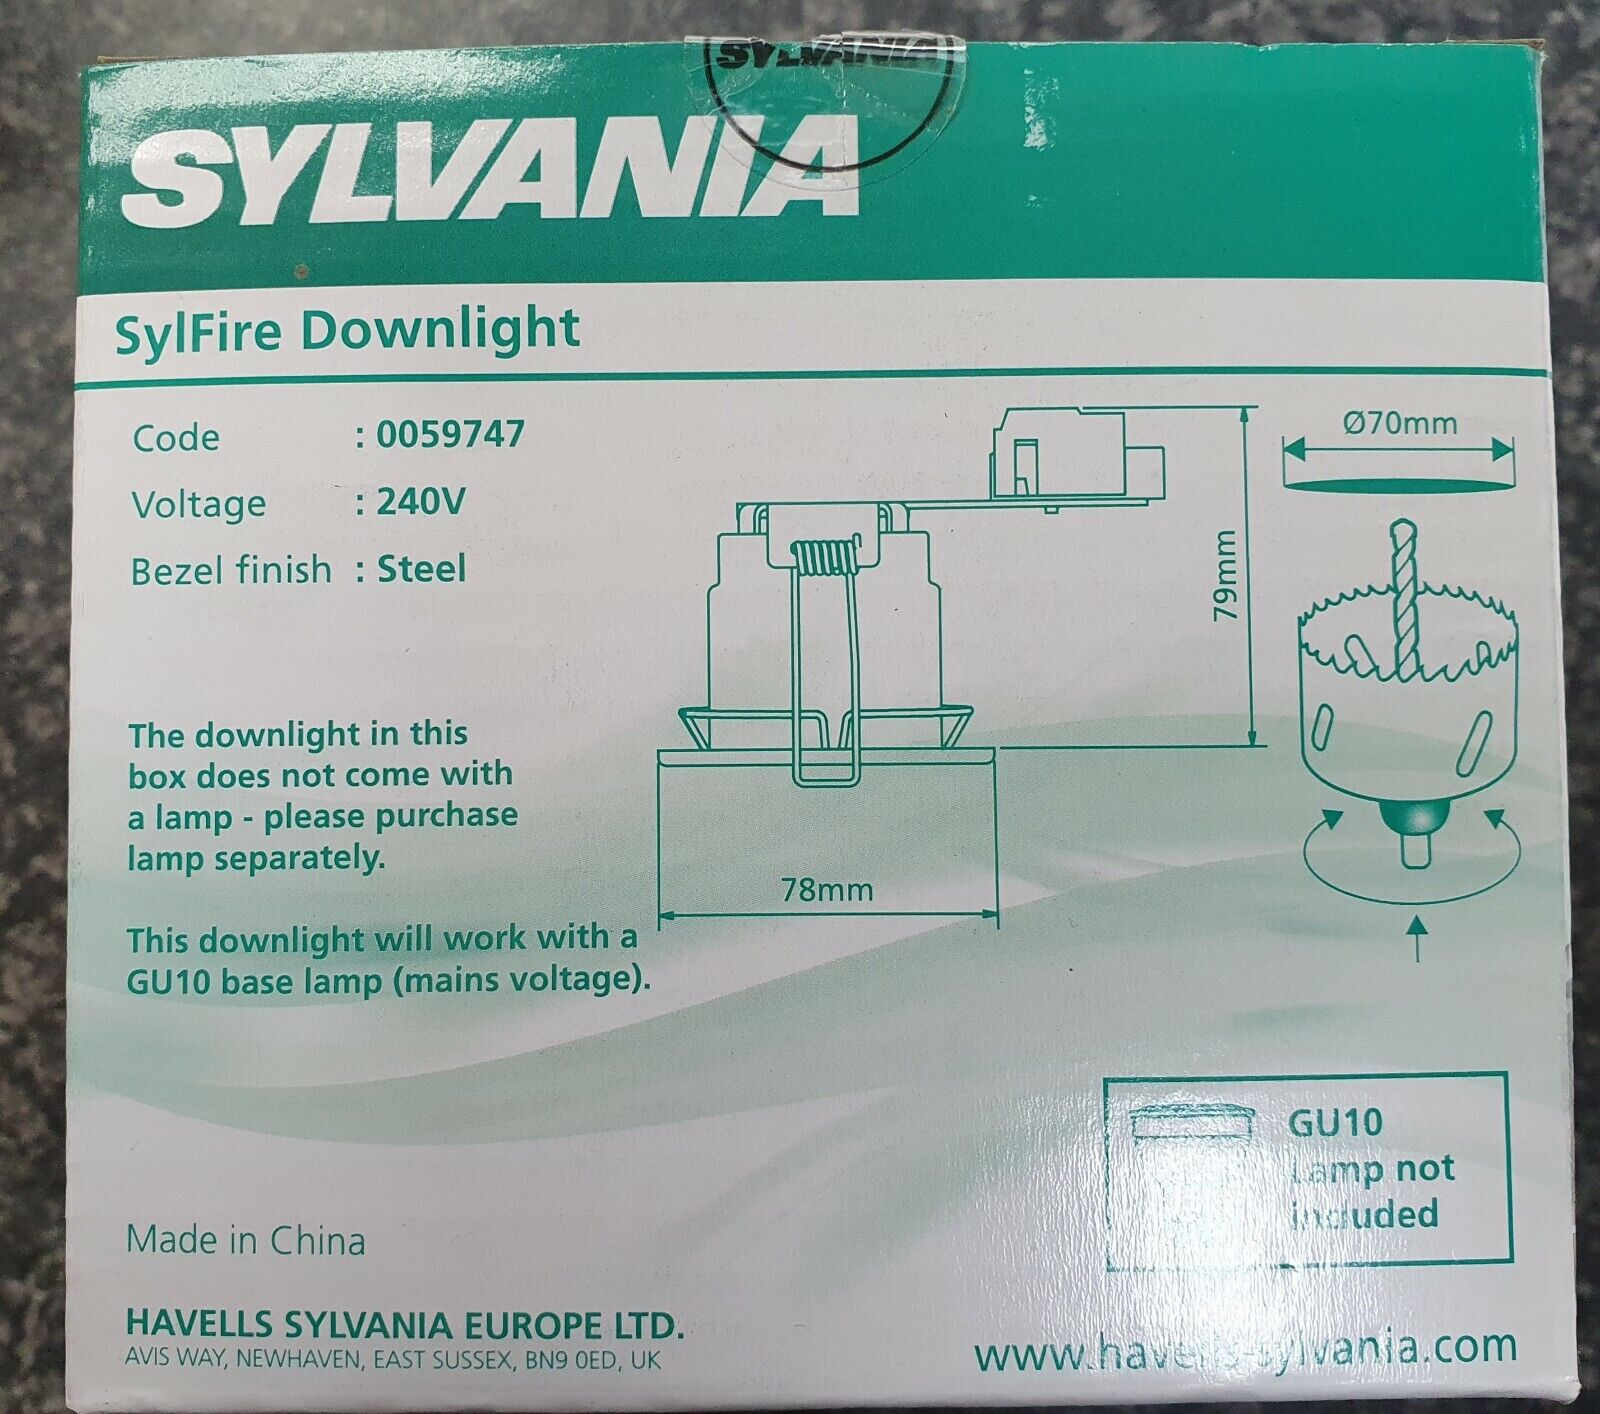 Chrome firerated 70mm cutout lamp not include Sylvania SylFire Downlight Steel